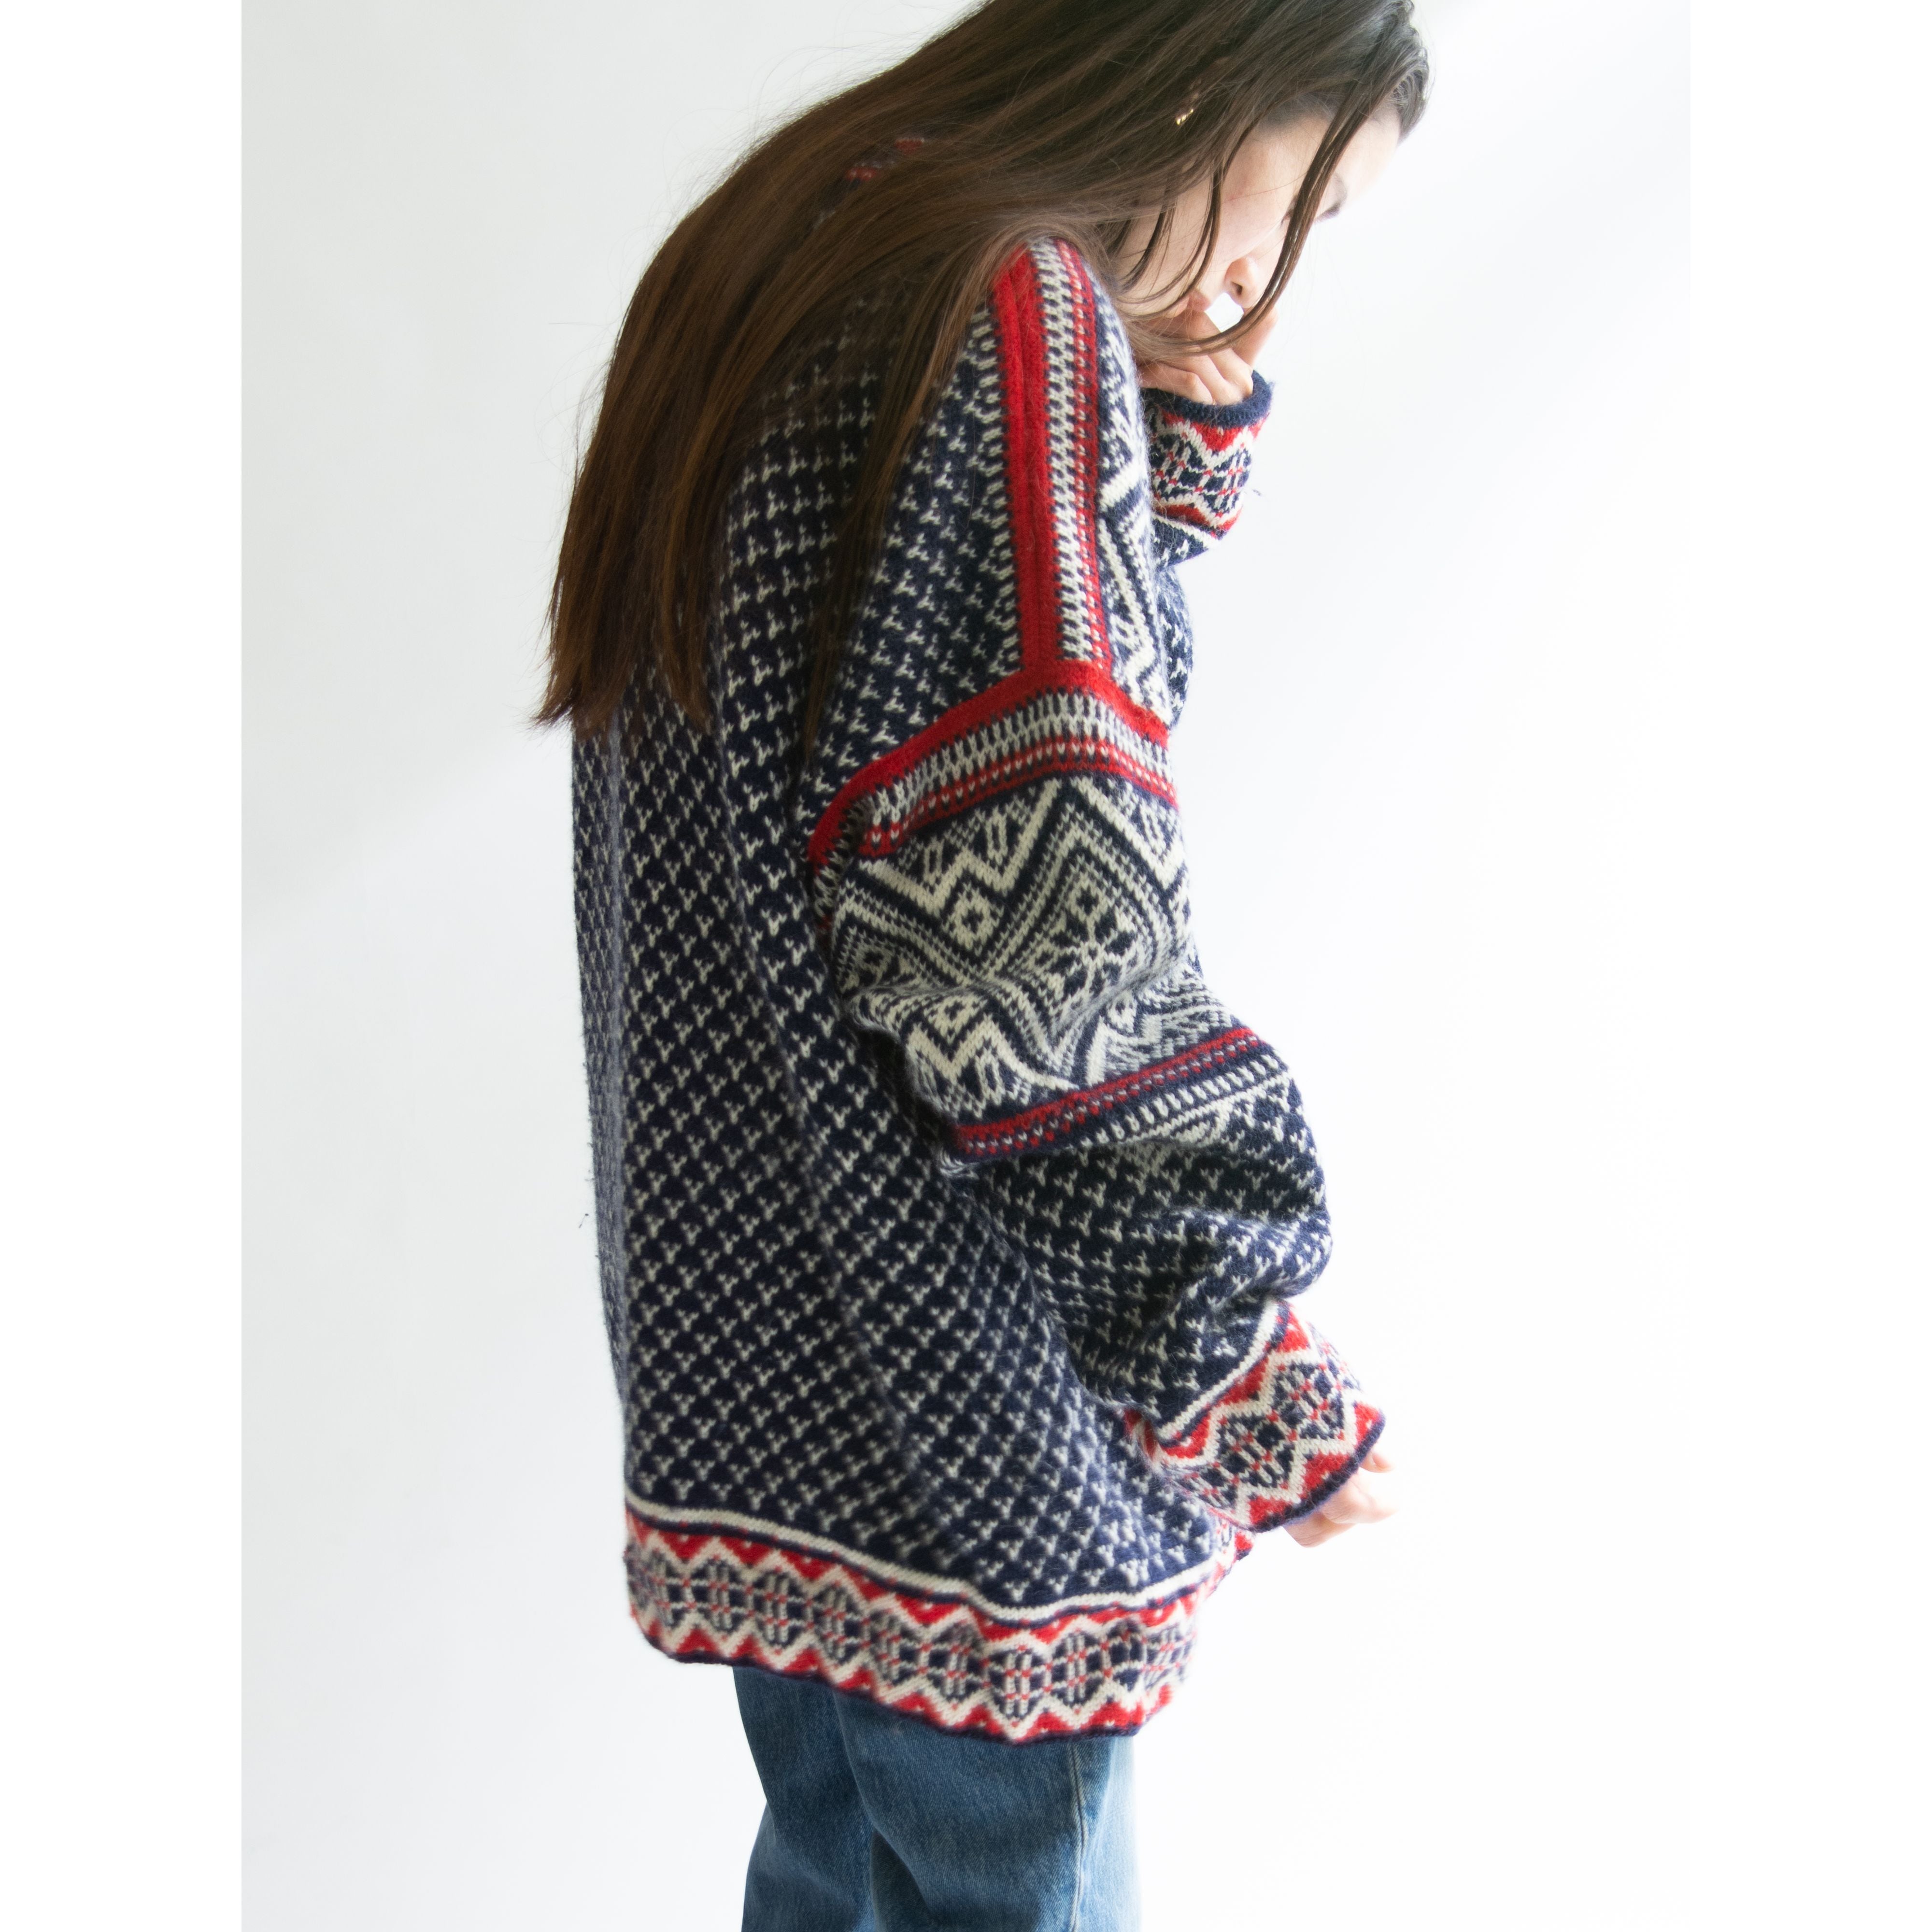 DALE OF NORWAY】Made in Norway 100% wool Nordic sweater 